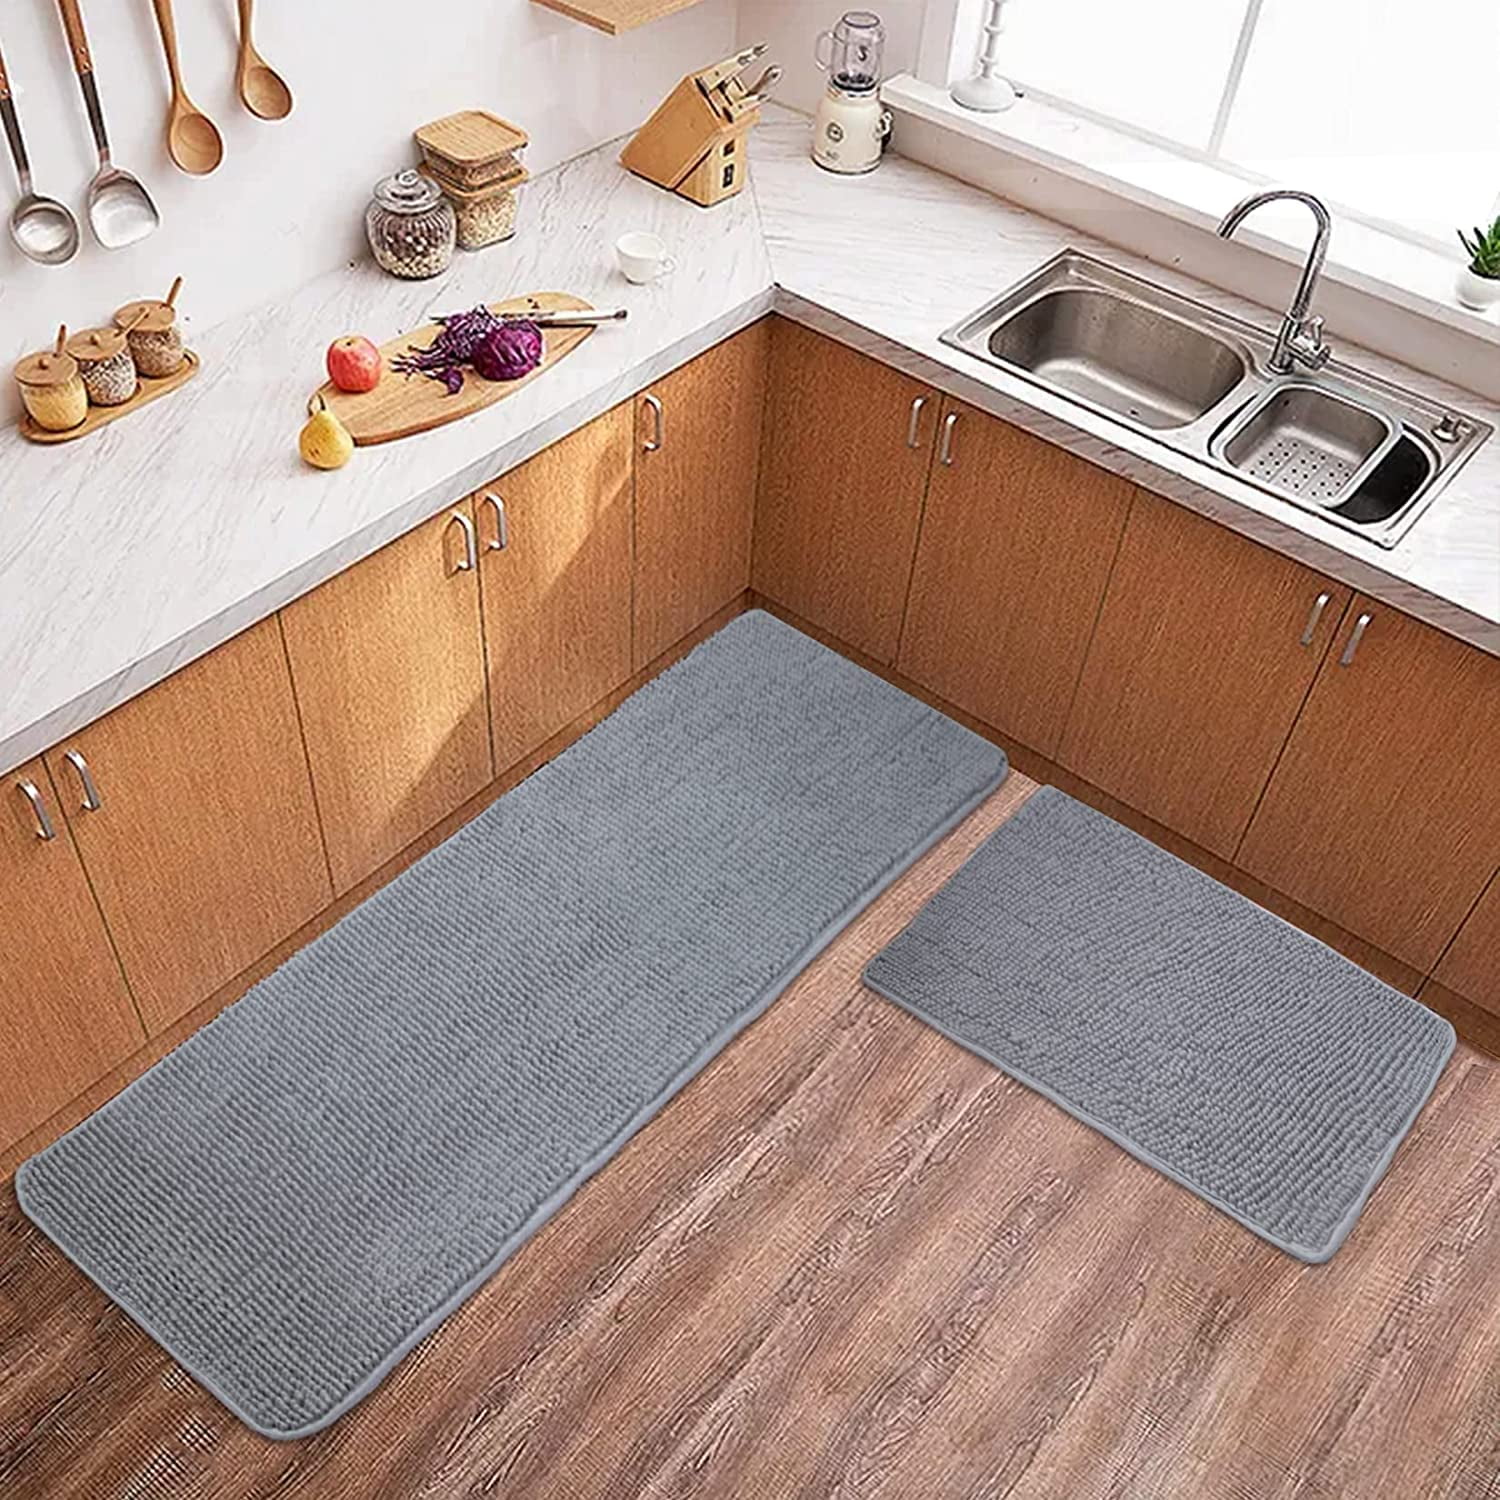 Aquevio Kitchen Mats, Kitchen mats for Floor, Non Skid Washable Memory Foam  Kitchen Rugs and Mats for Bedroom, Office, Sink, Laundry, [2PCS] Black